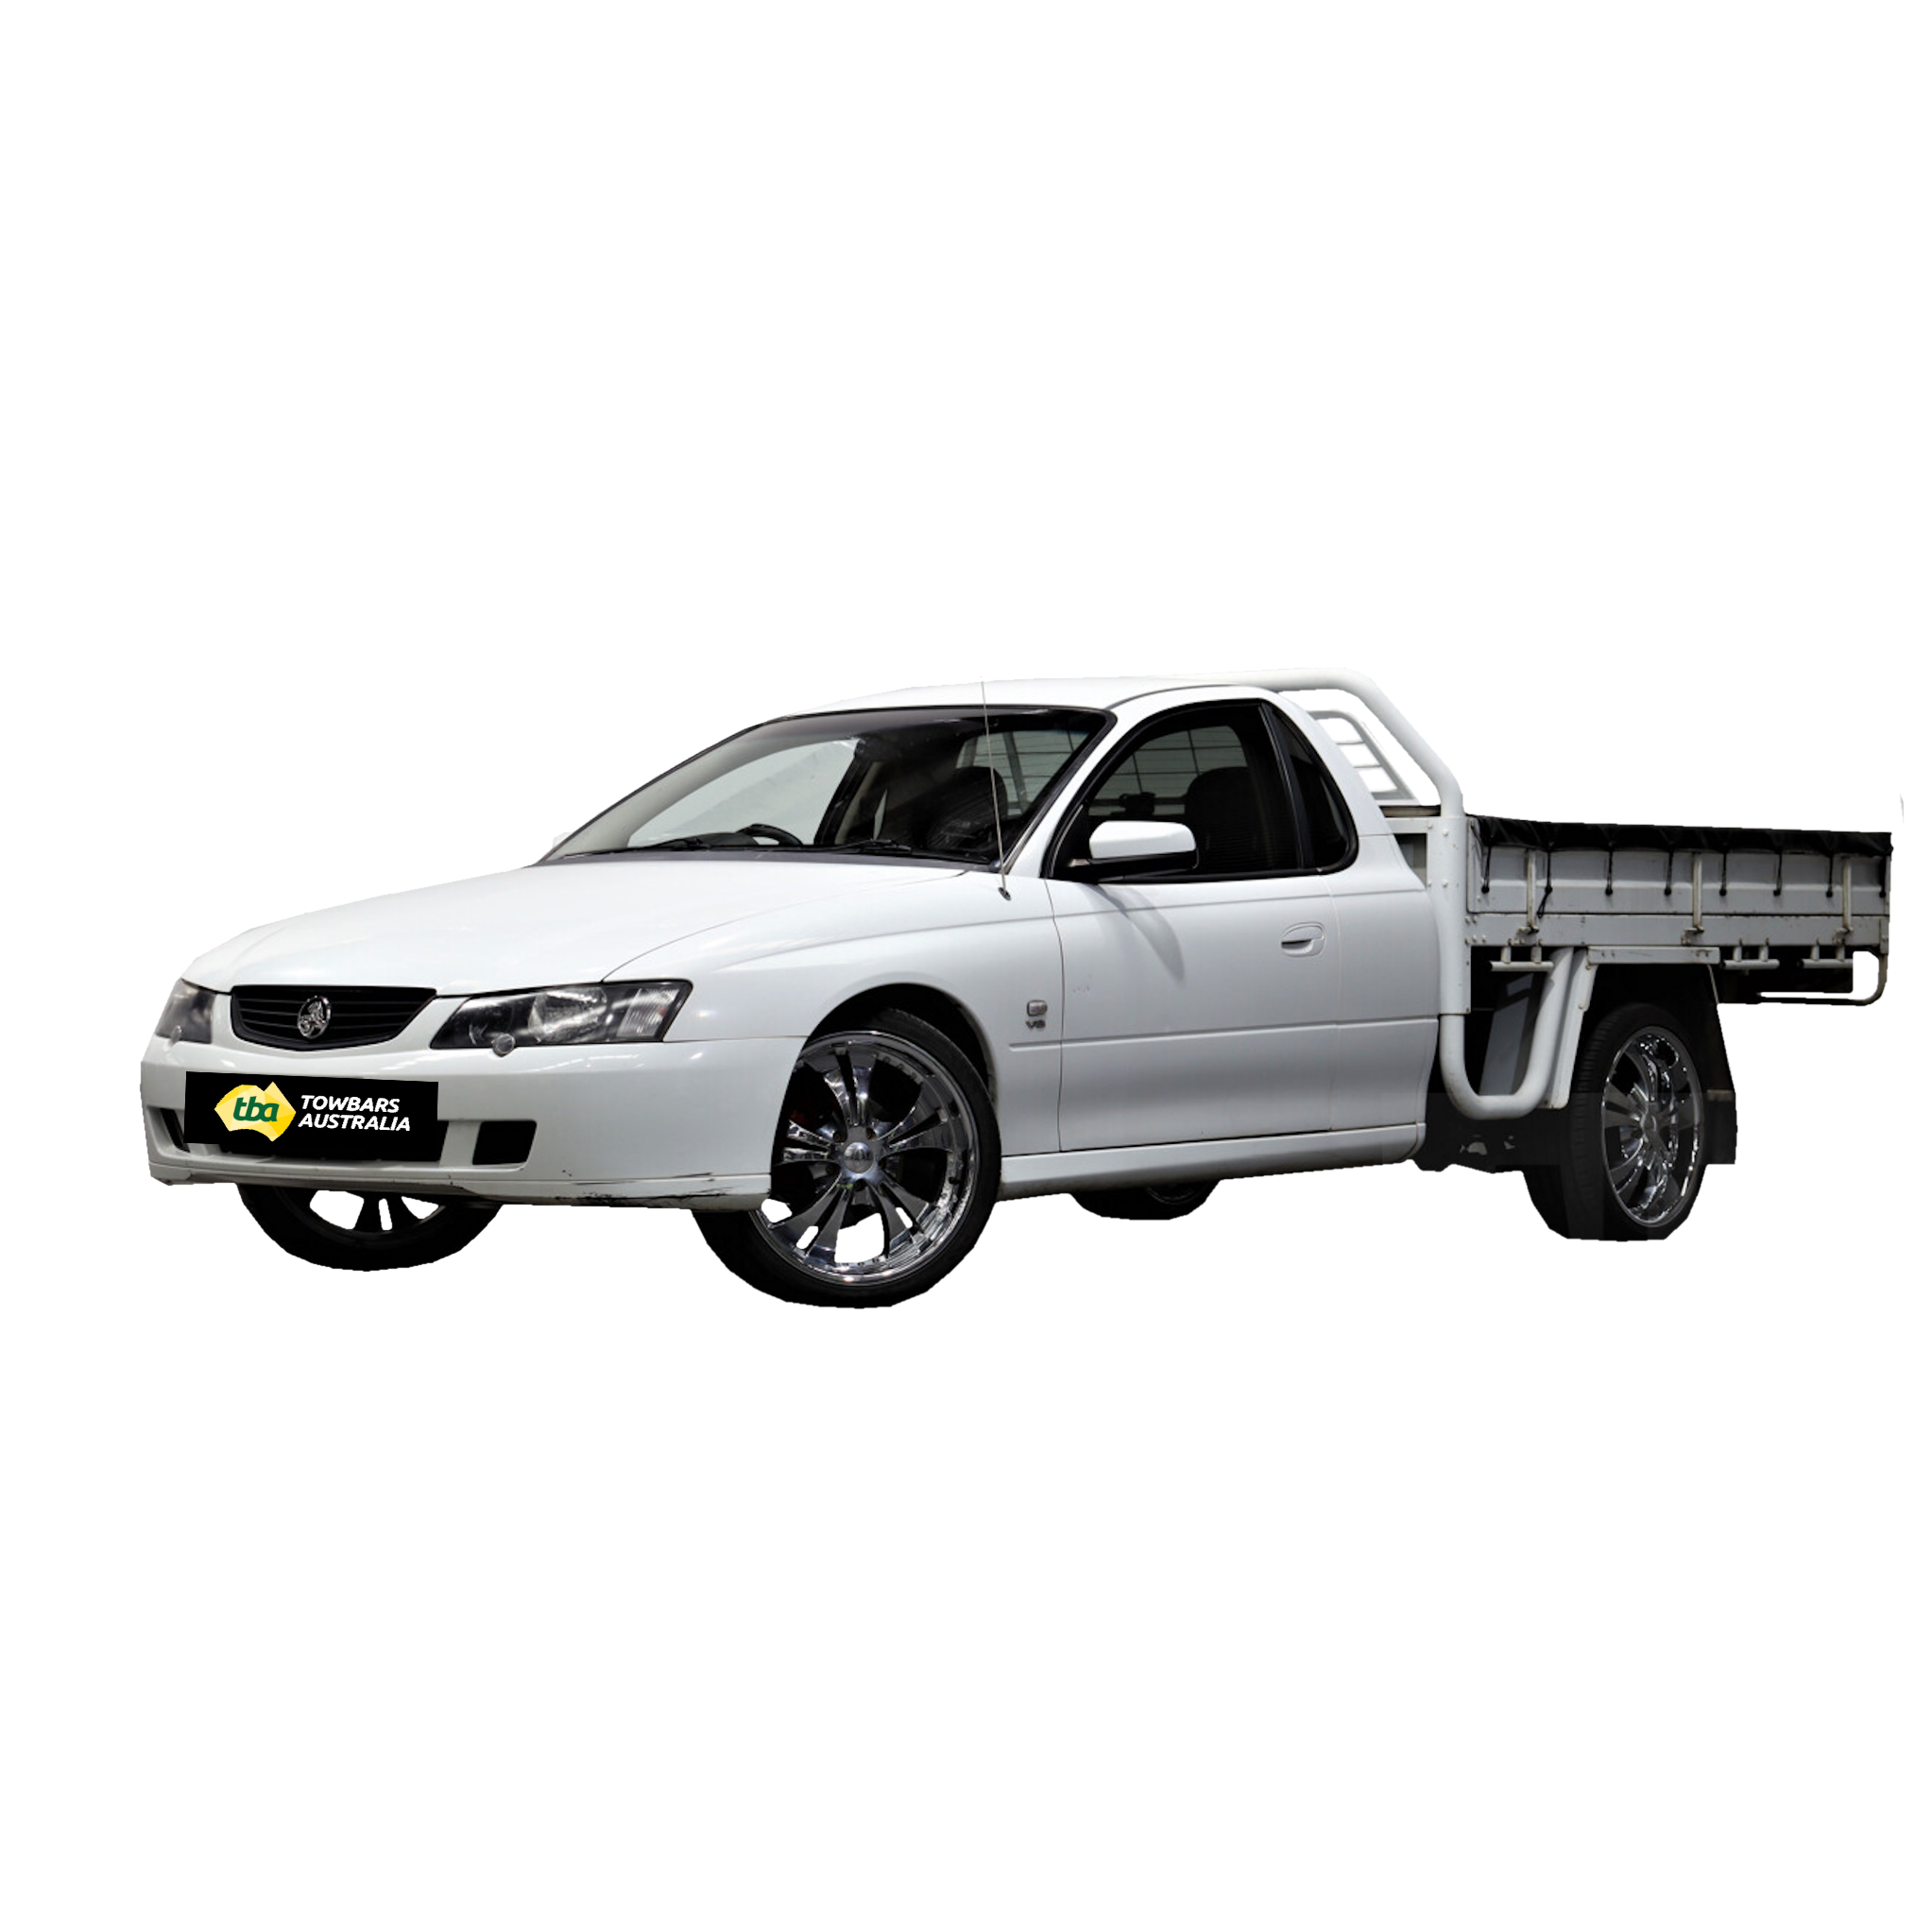 Holden Commodore 1 Tonner Cab Chassis 8' 06/2003 - 02/2006 - Towbar Kit - HEAVY DUTY PREMIUM